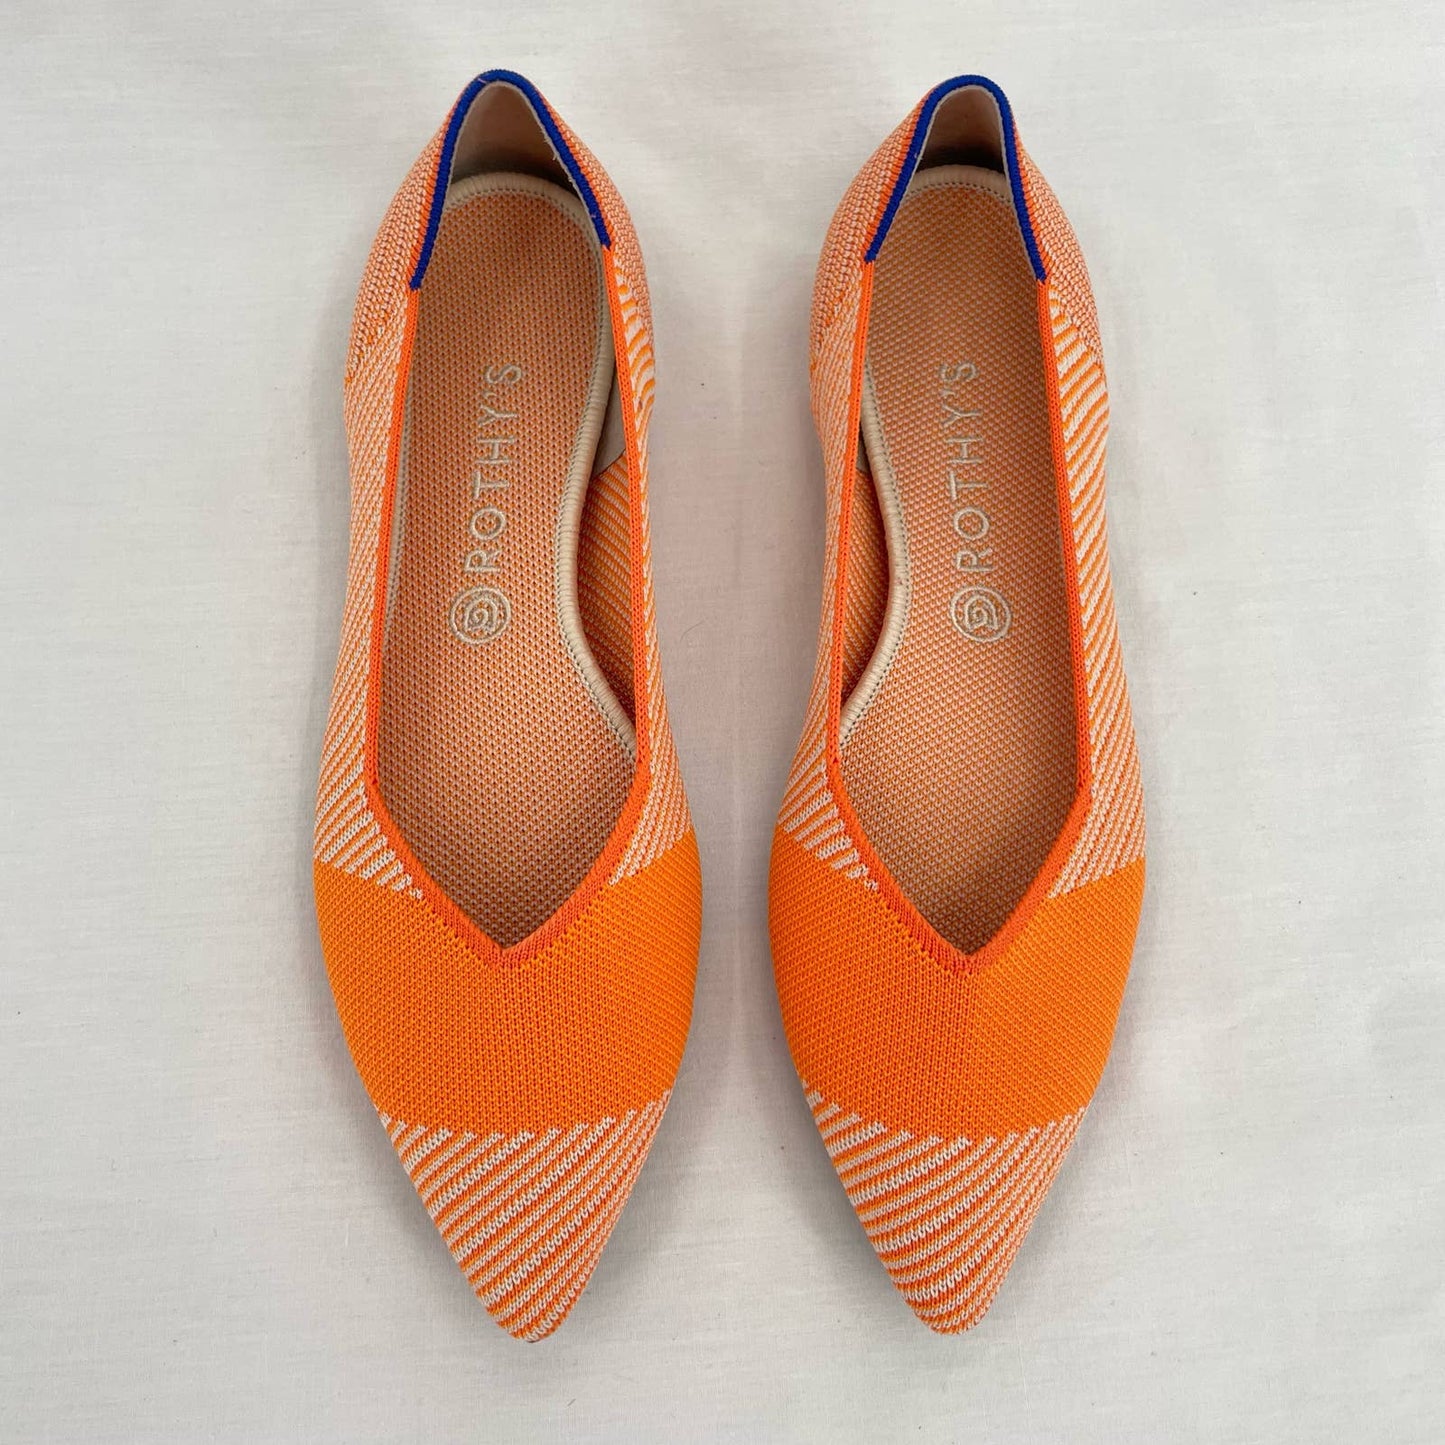 Rothy’s The Point Sherbet Orange White Striped Flats Bright Casual Summer Shoes Size 11.5